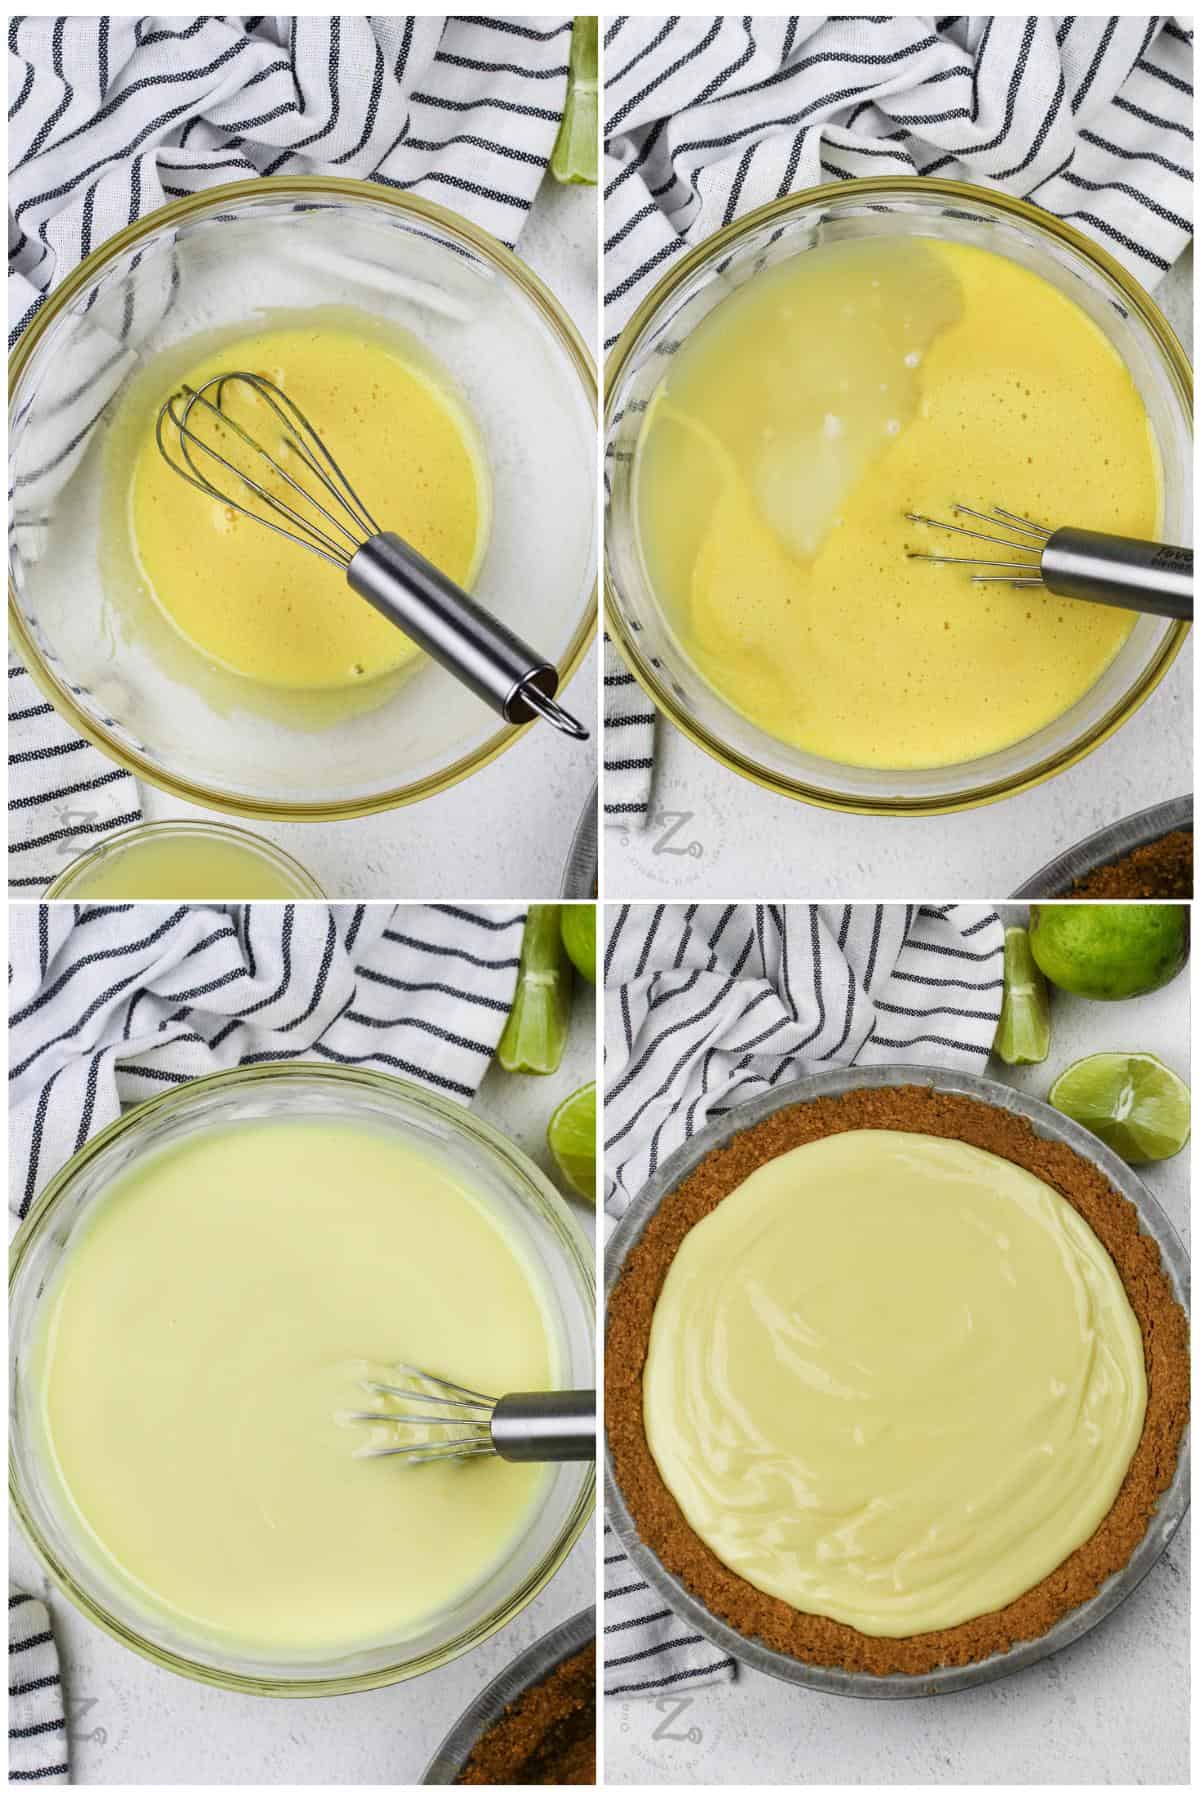 process of making filling and adding to crust to make a Key Lime Pie